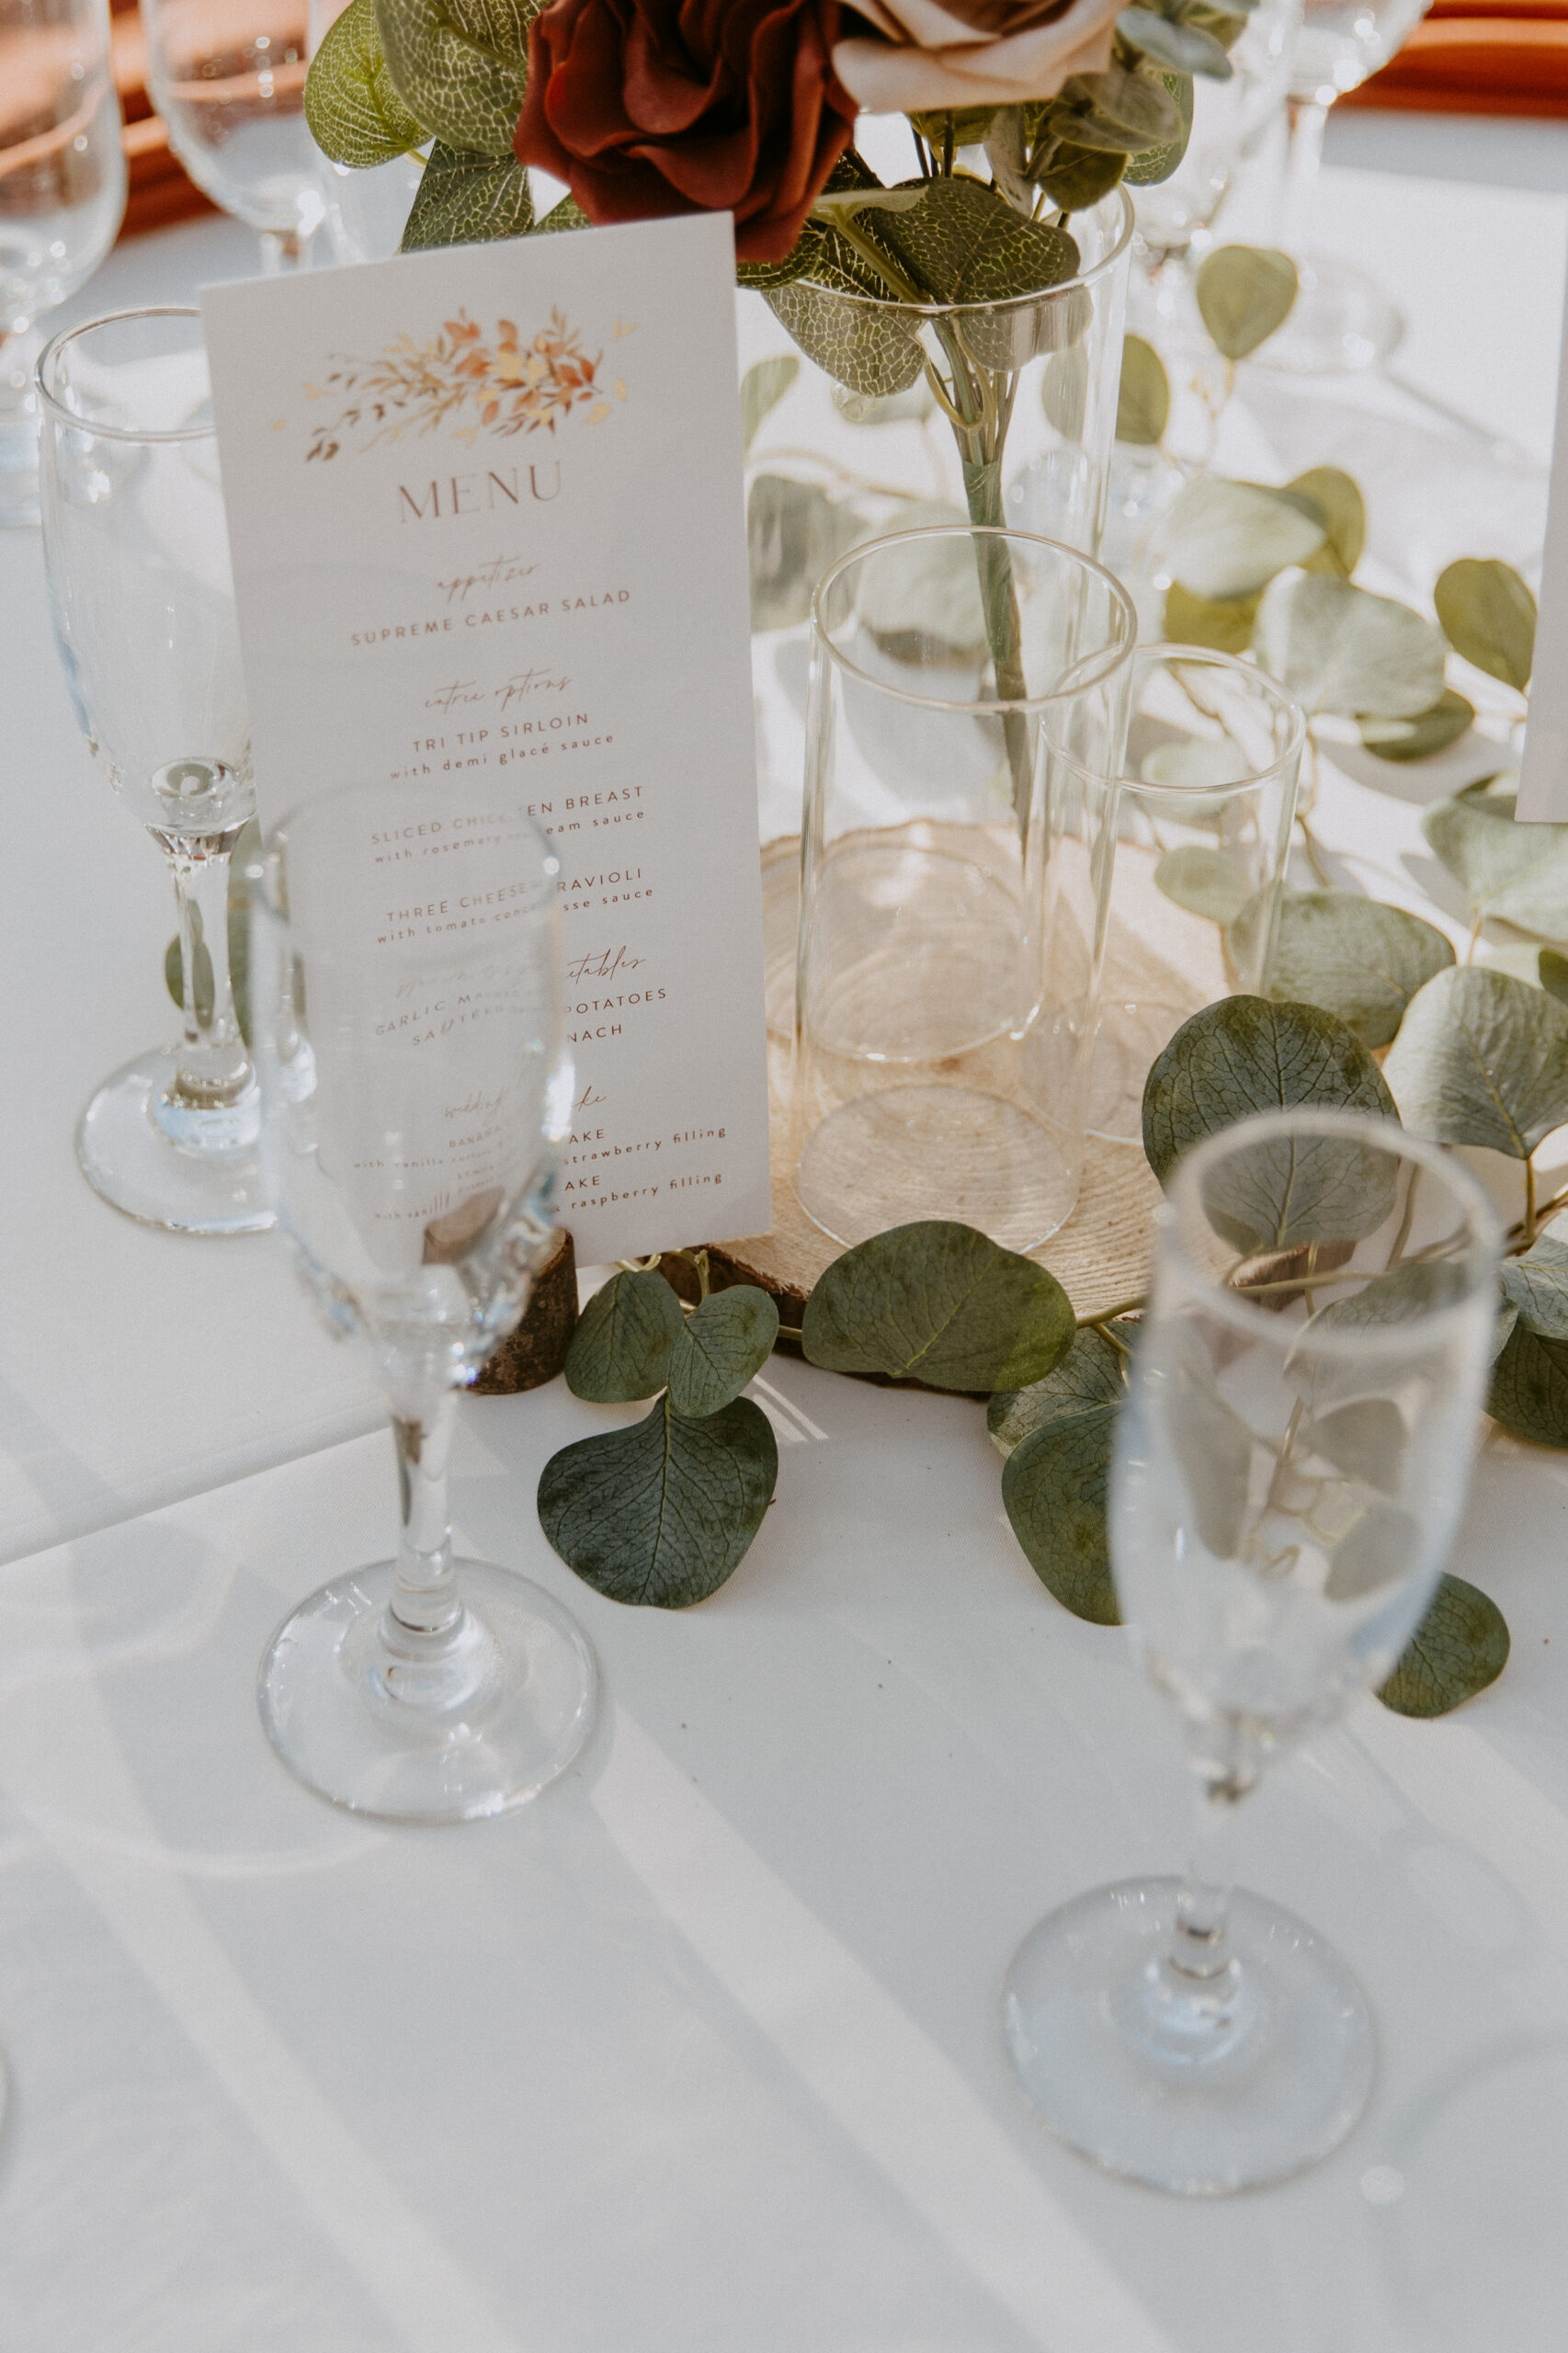 Elegant table setting with a menu card surrounded by greenery and glassware